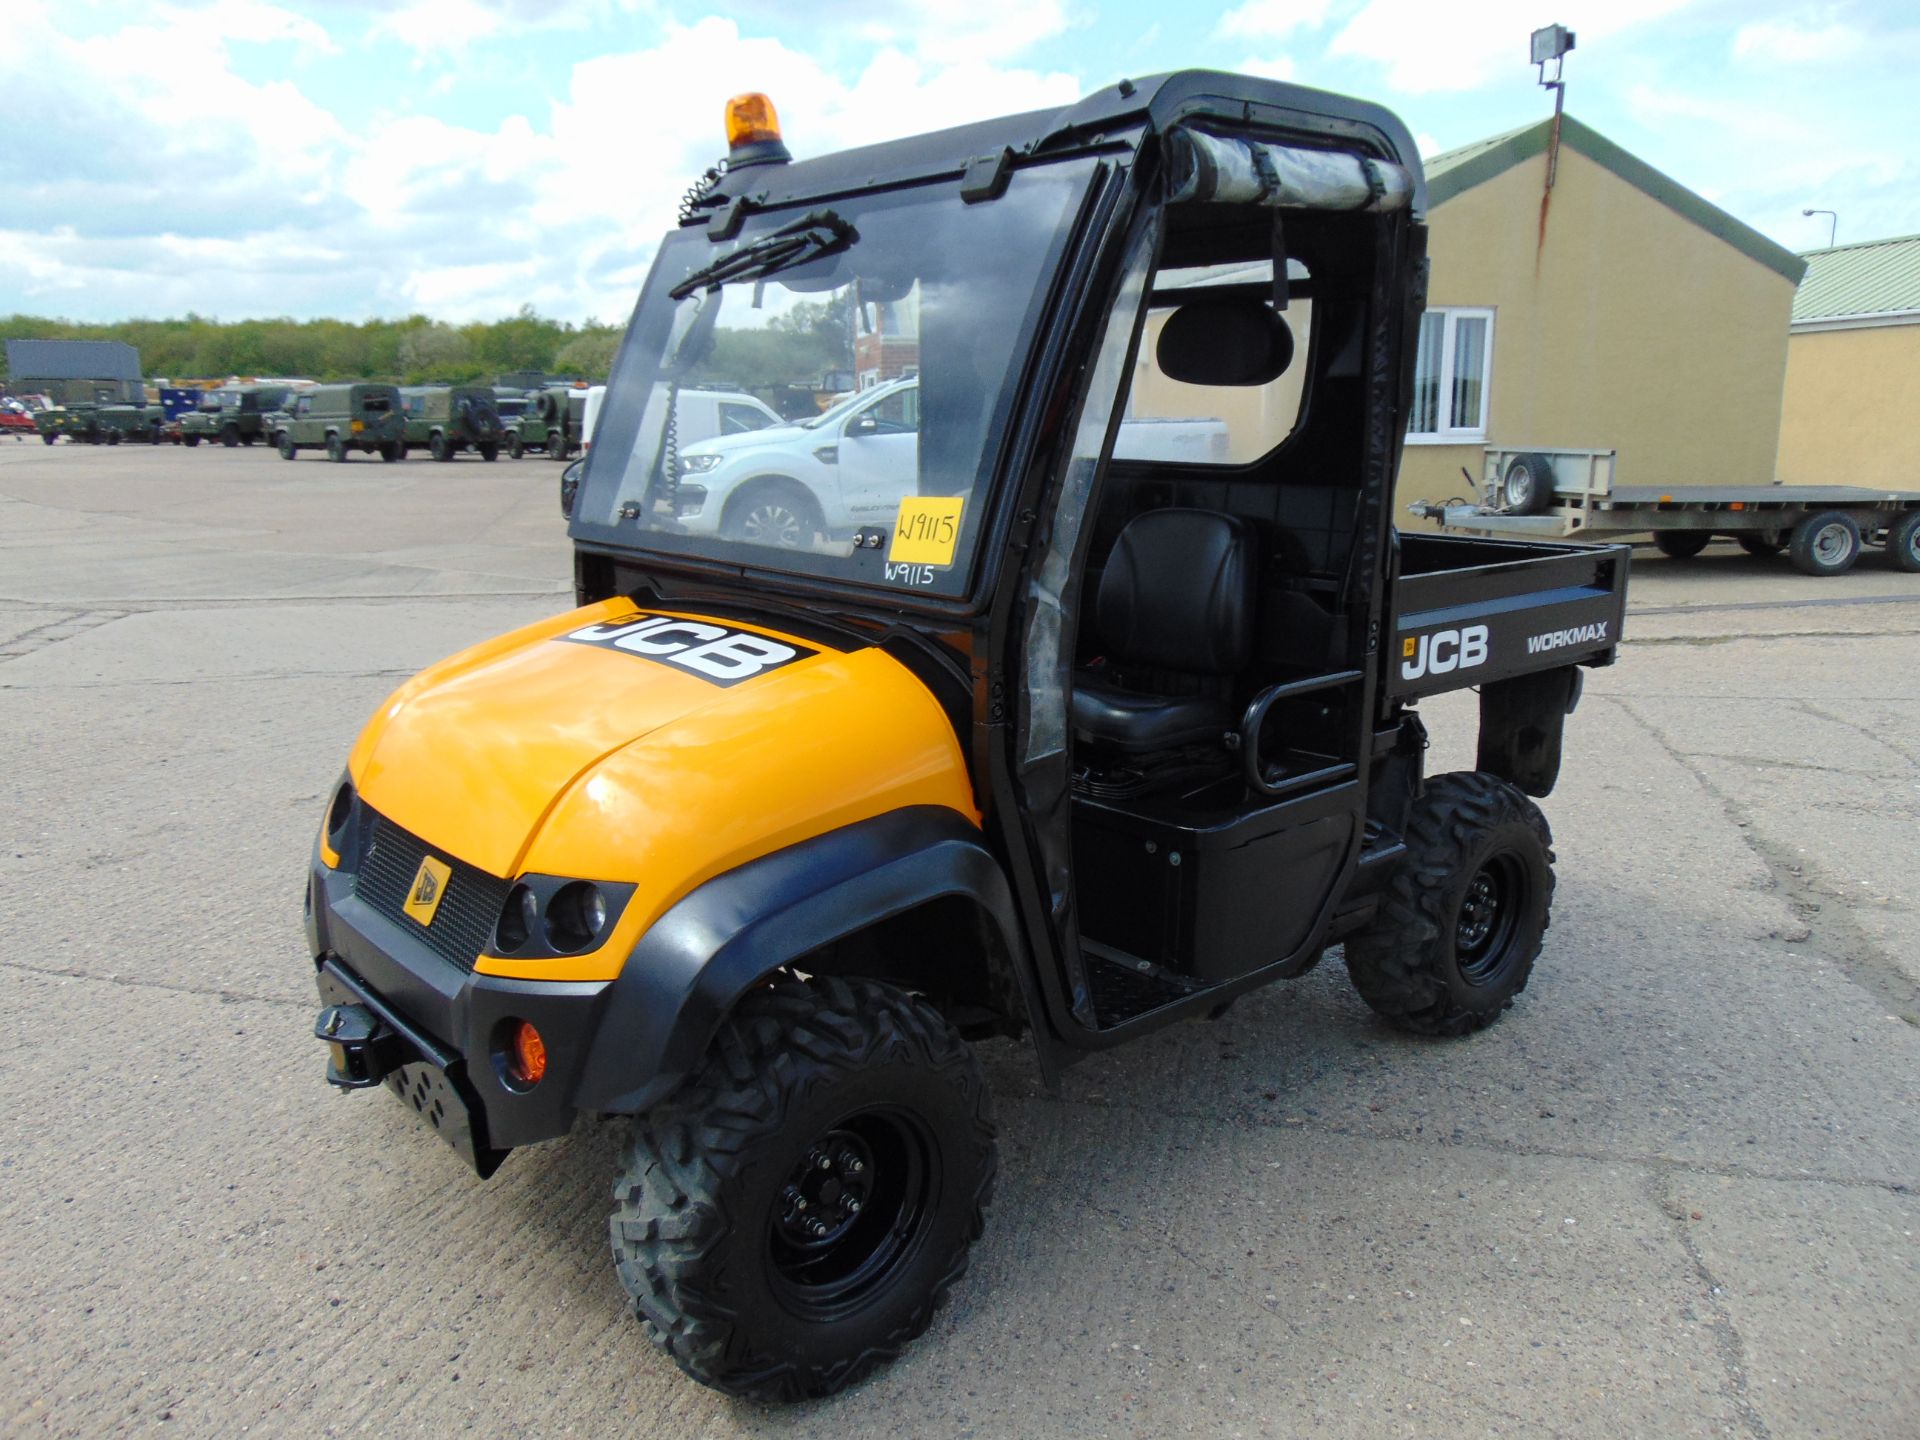 JCB Workmax 800D 4WD Diesel Utility Vehicle UTV ONLY 58 Hours!! - Image 3 of 21